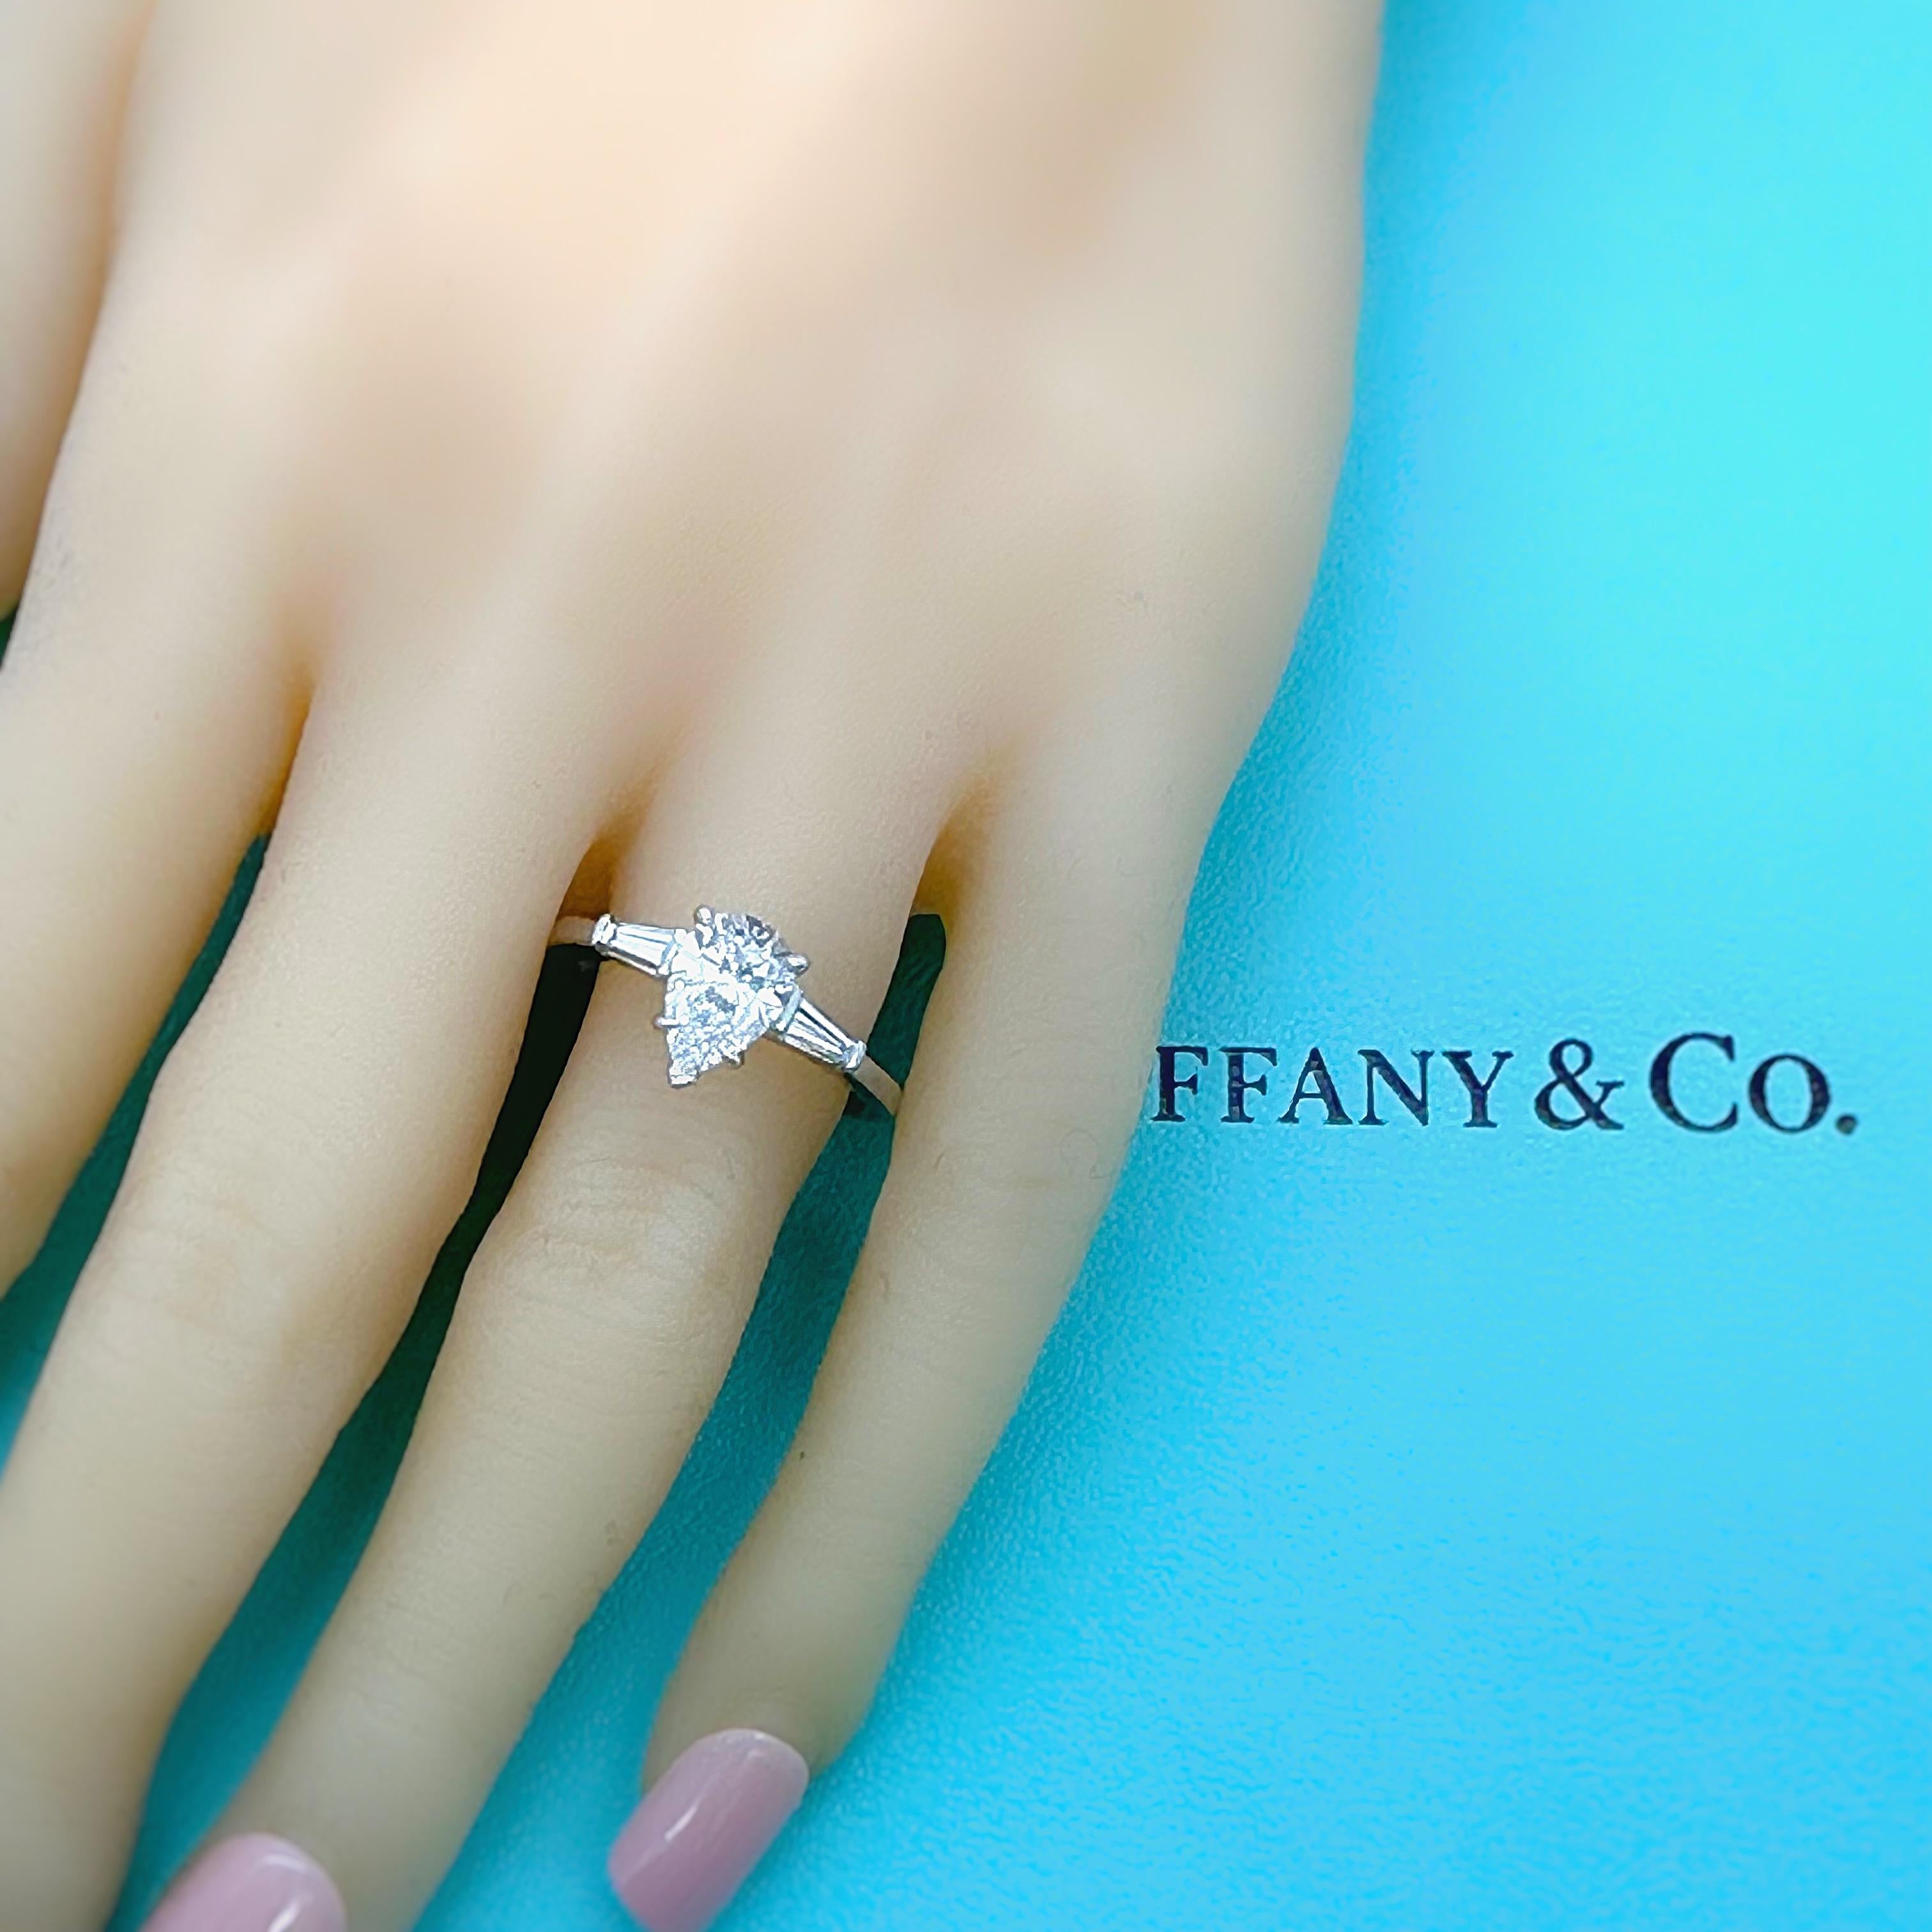 Tiffany & Co. Pear Diamond 1.07 D VS2 with Baguette Side Stones Engagement Ring For Sale 7